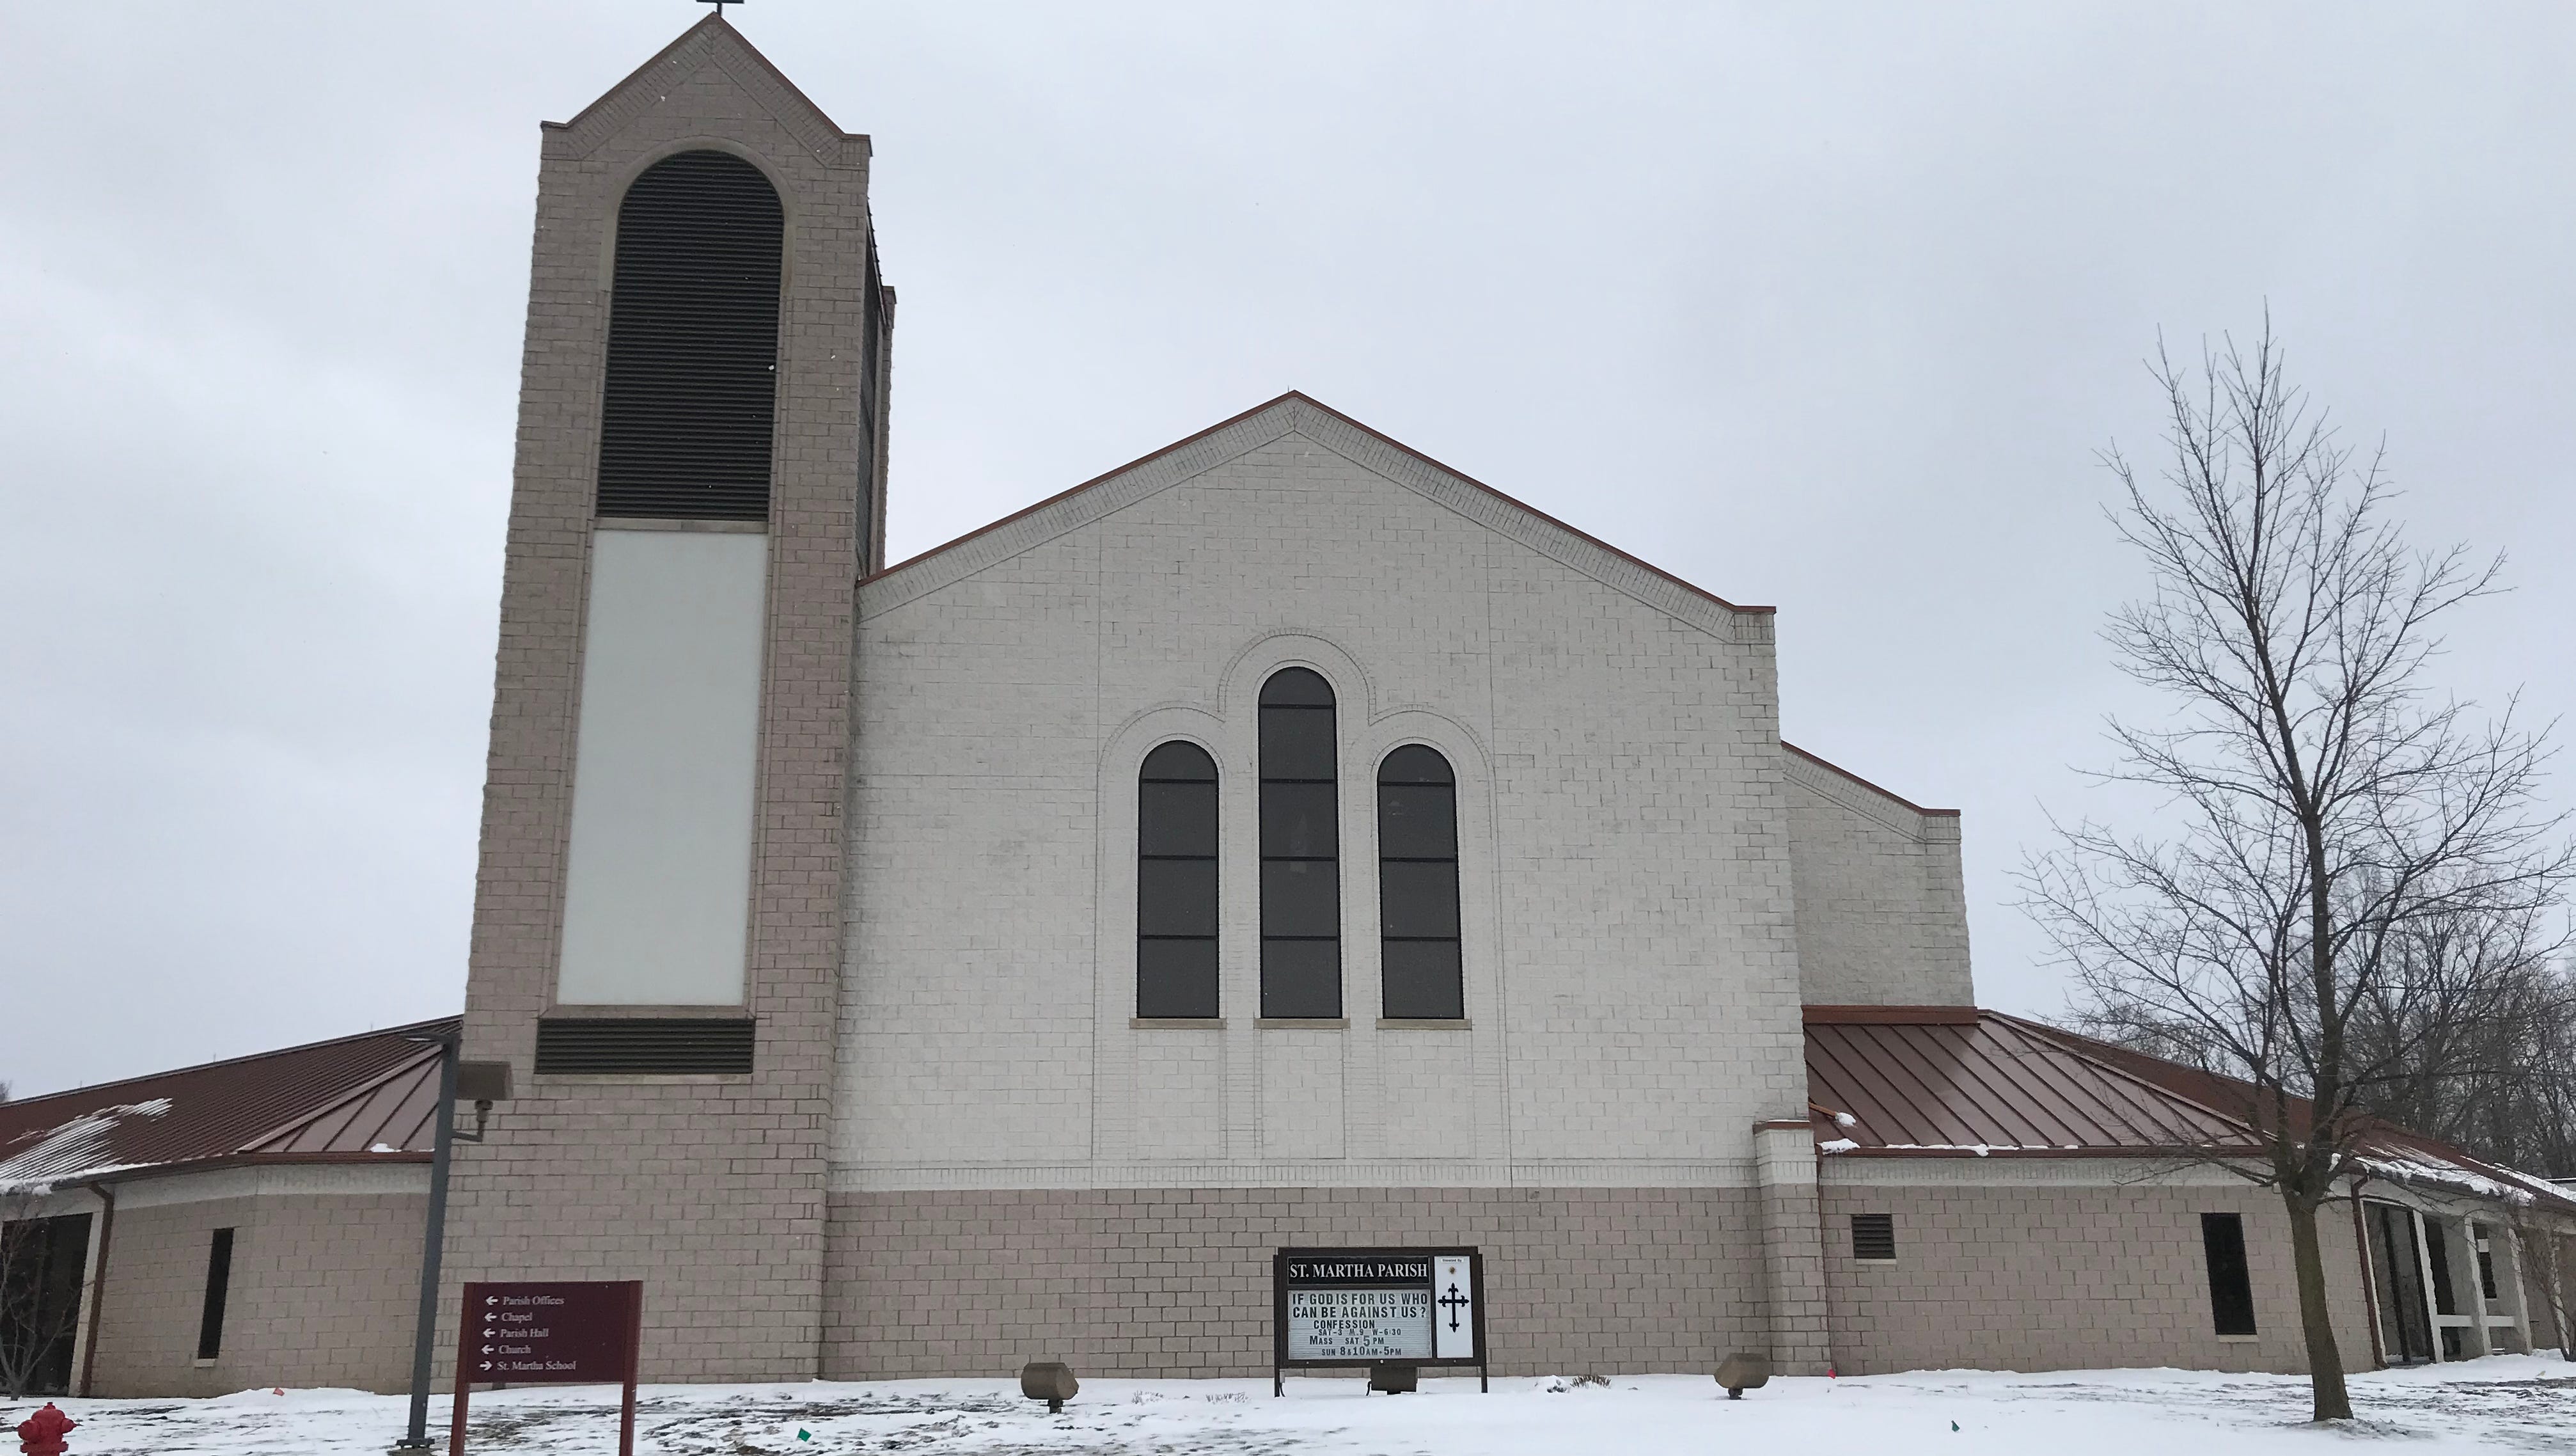 Meanwhile, at St. Martha Parish in Okemos, which has a school as well as a church, "It's shocking, the whole thing," said church member Reba Dean. "We're all kind of upset about it."